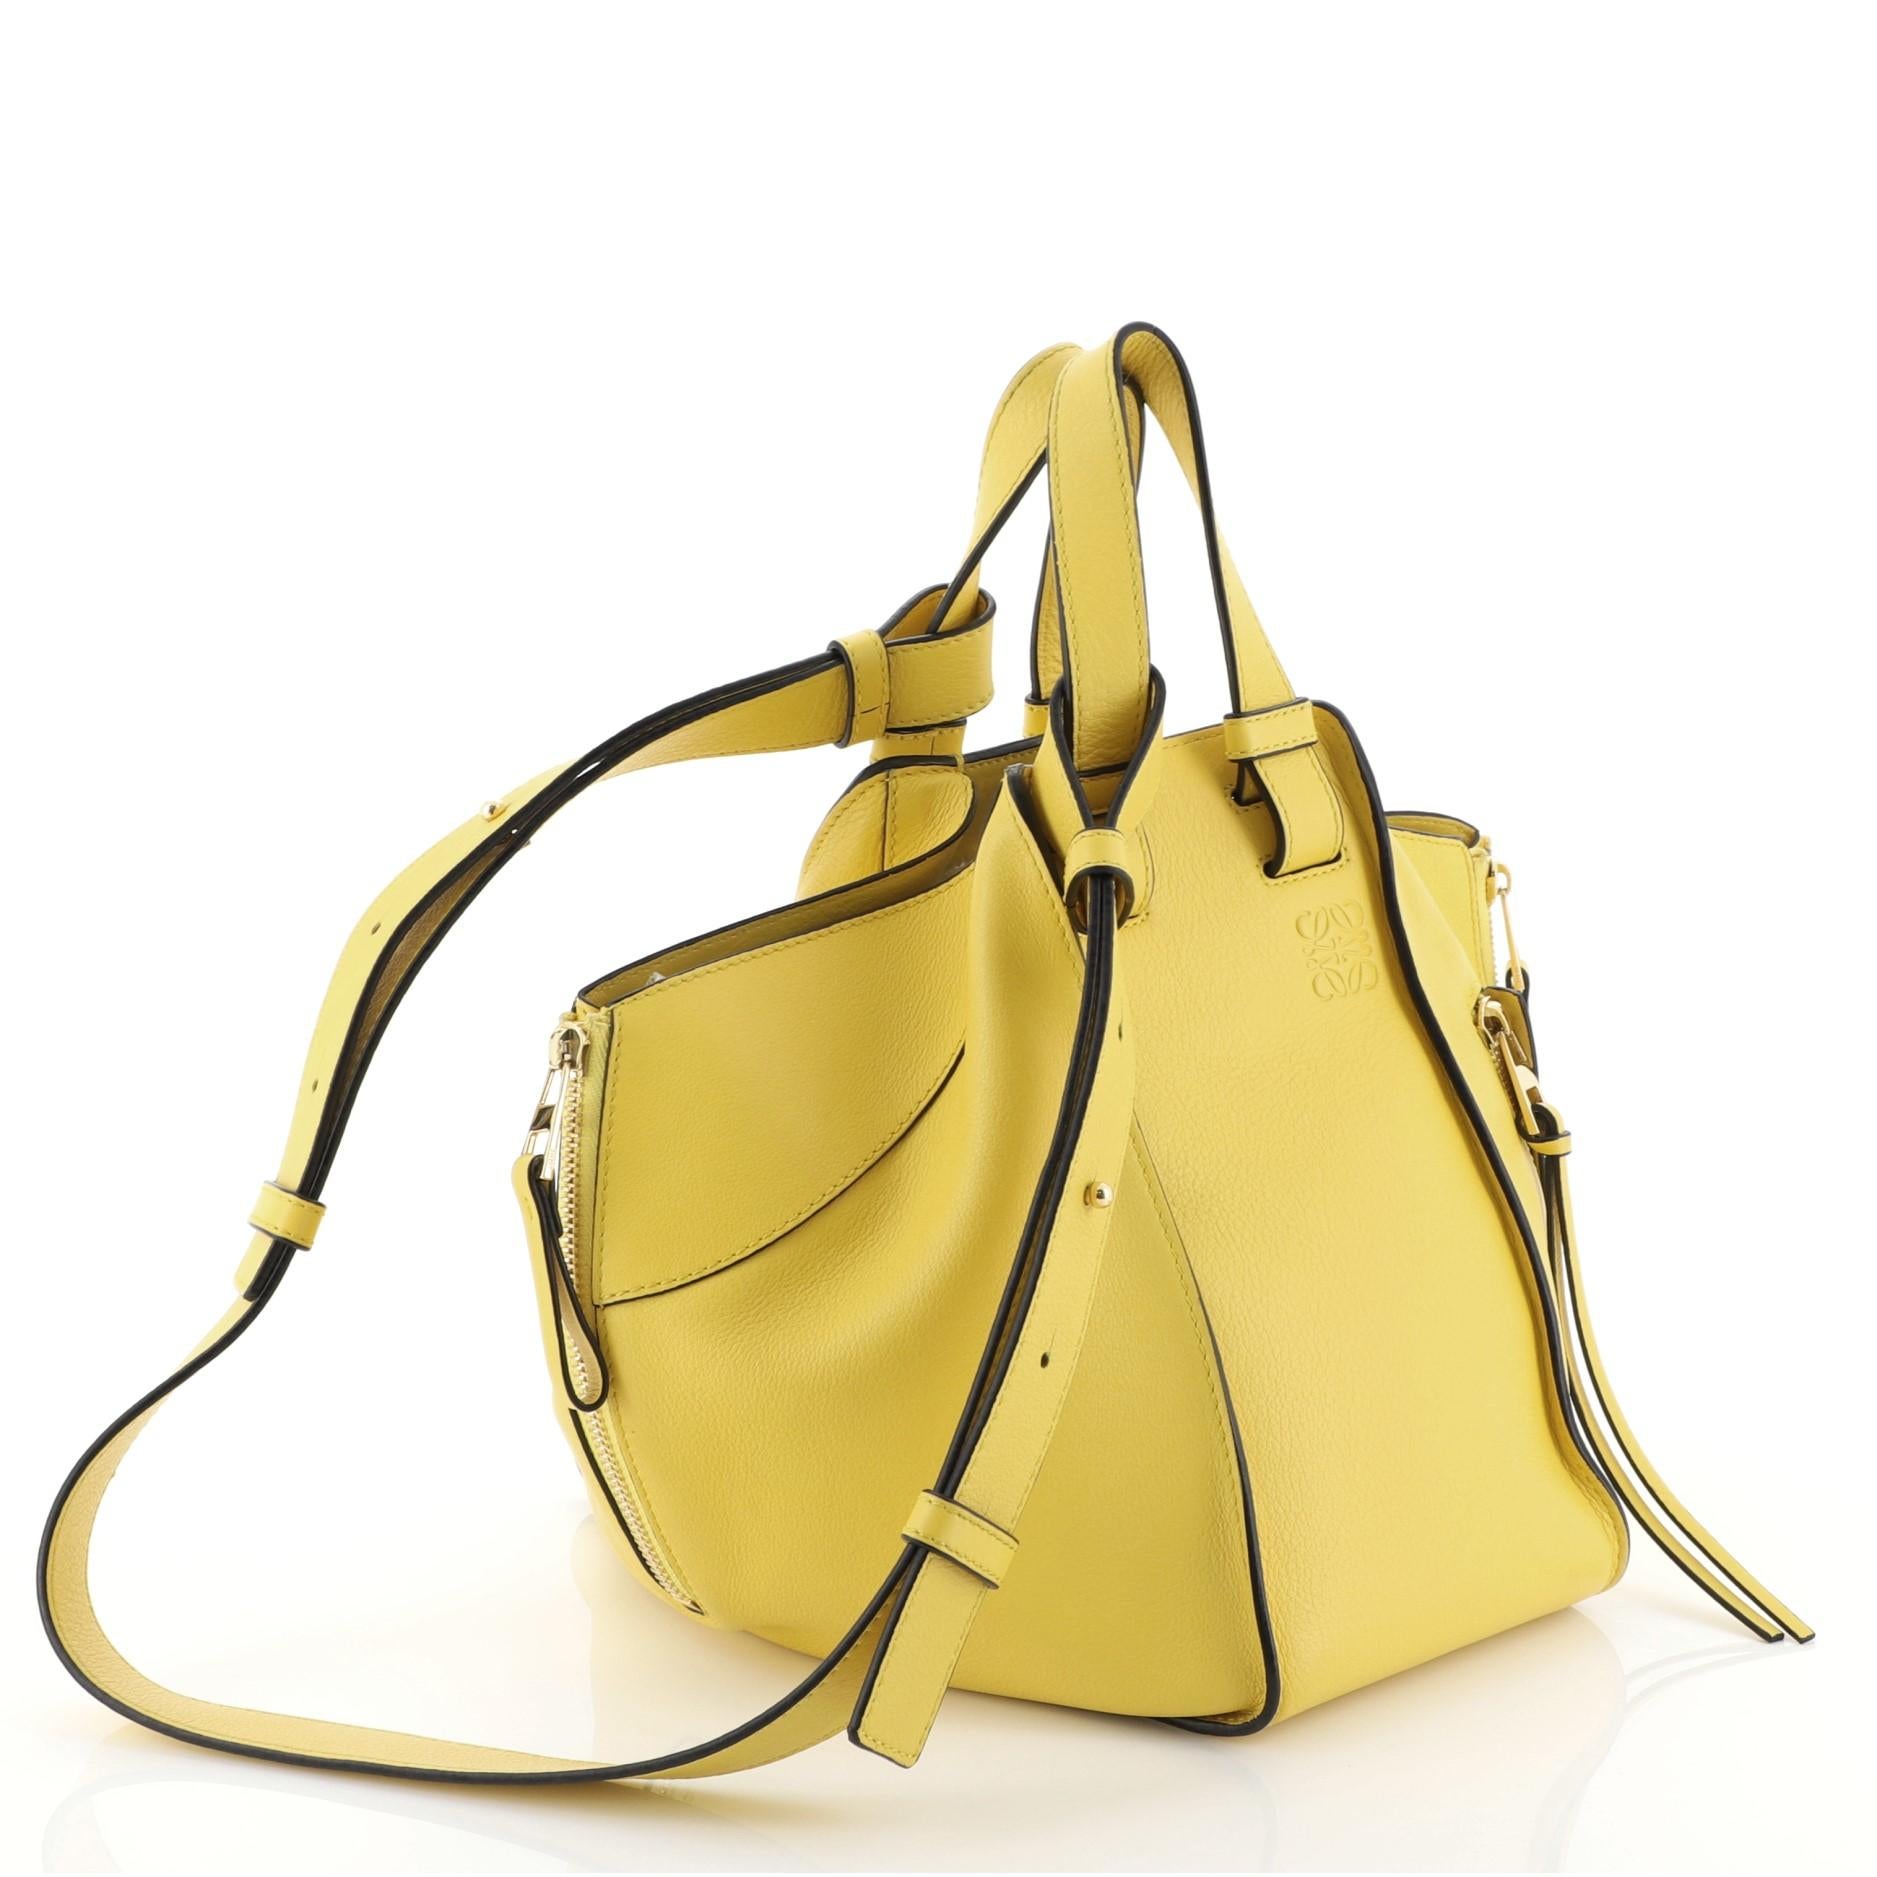 This Loewe Hammock Bag Leather Small, crafted in yellow leather, features dual top flat handles, exterior zip pocket, side zip gussets, and gold-tone hardware. It opens to a black fabric interior with slip pocket. 

Estimated Retail Price: